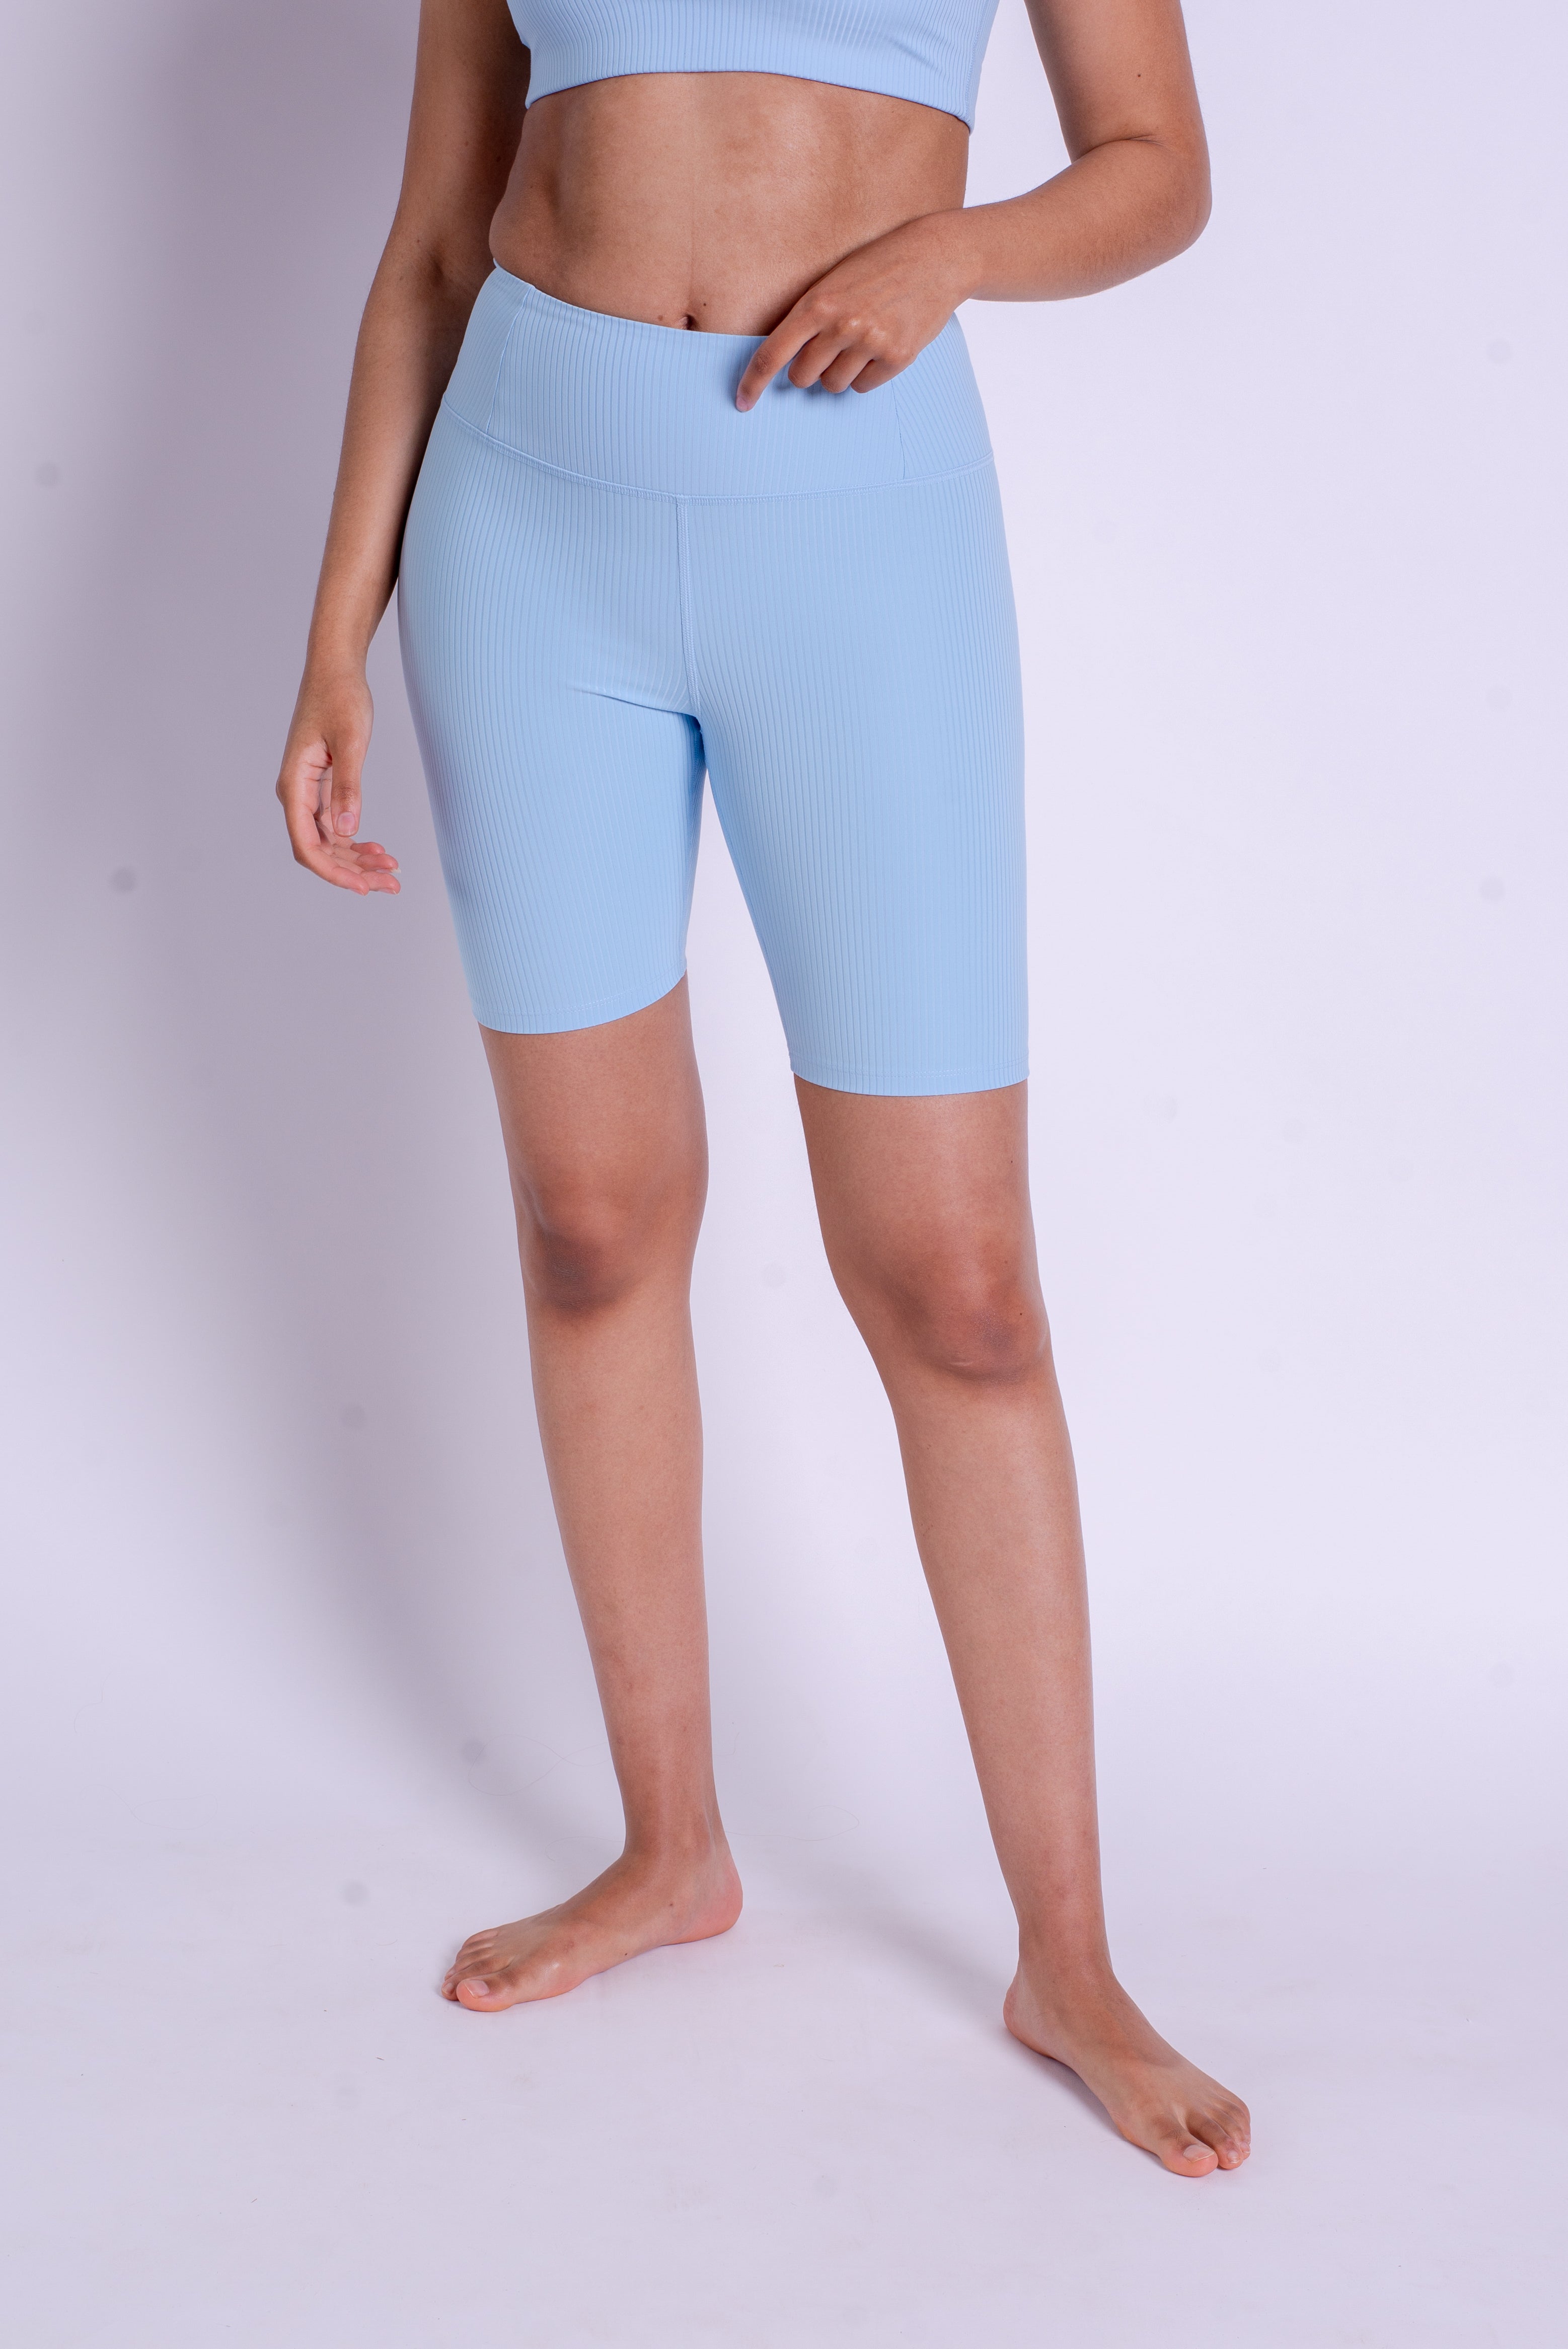 Girlfriend Collective RIB Bike Shorts - Made from recycled plastic